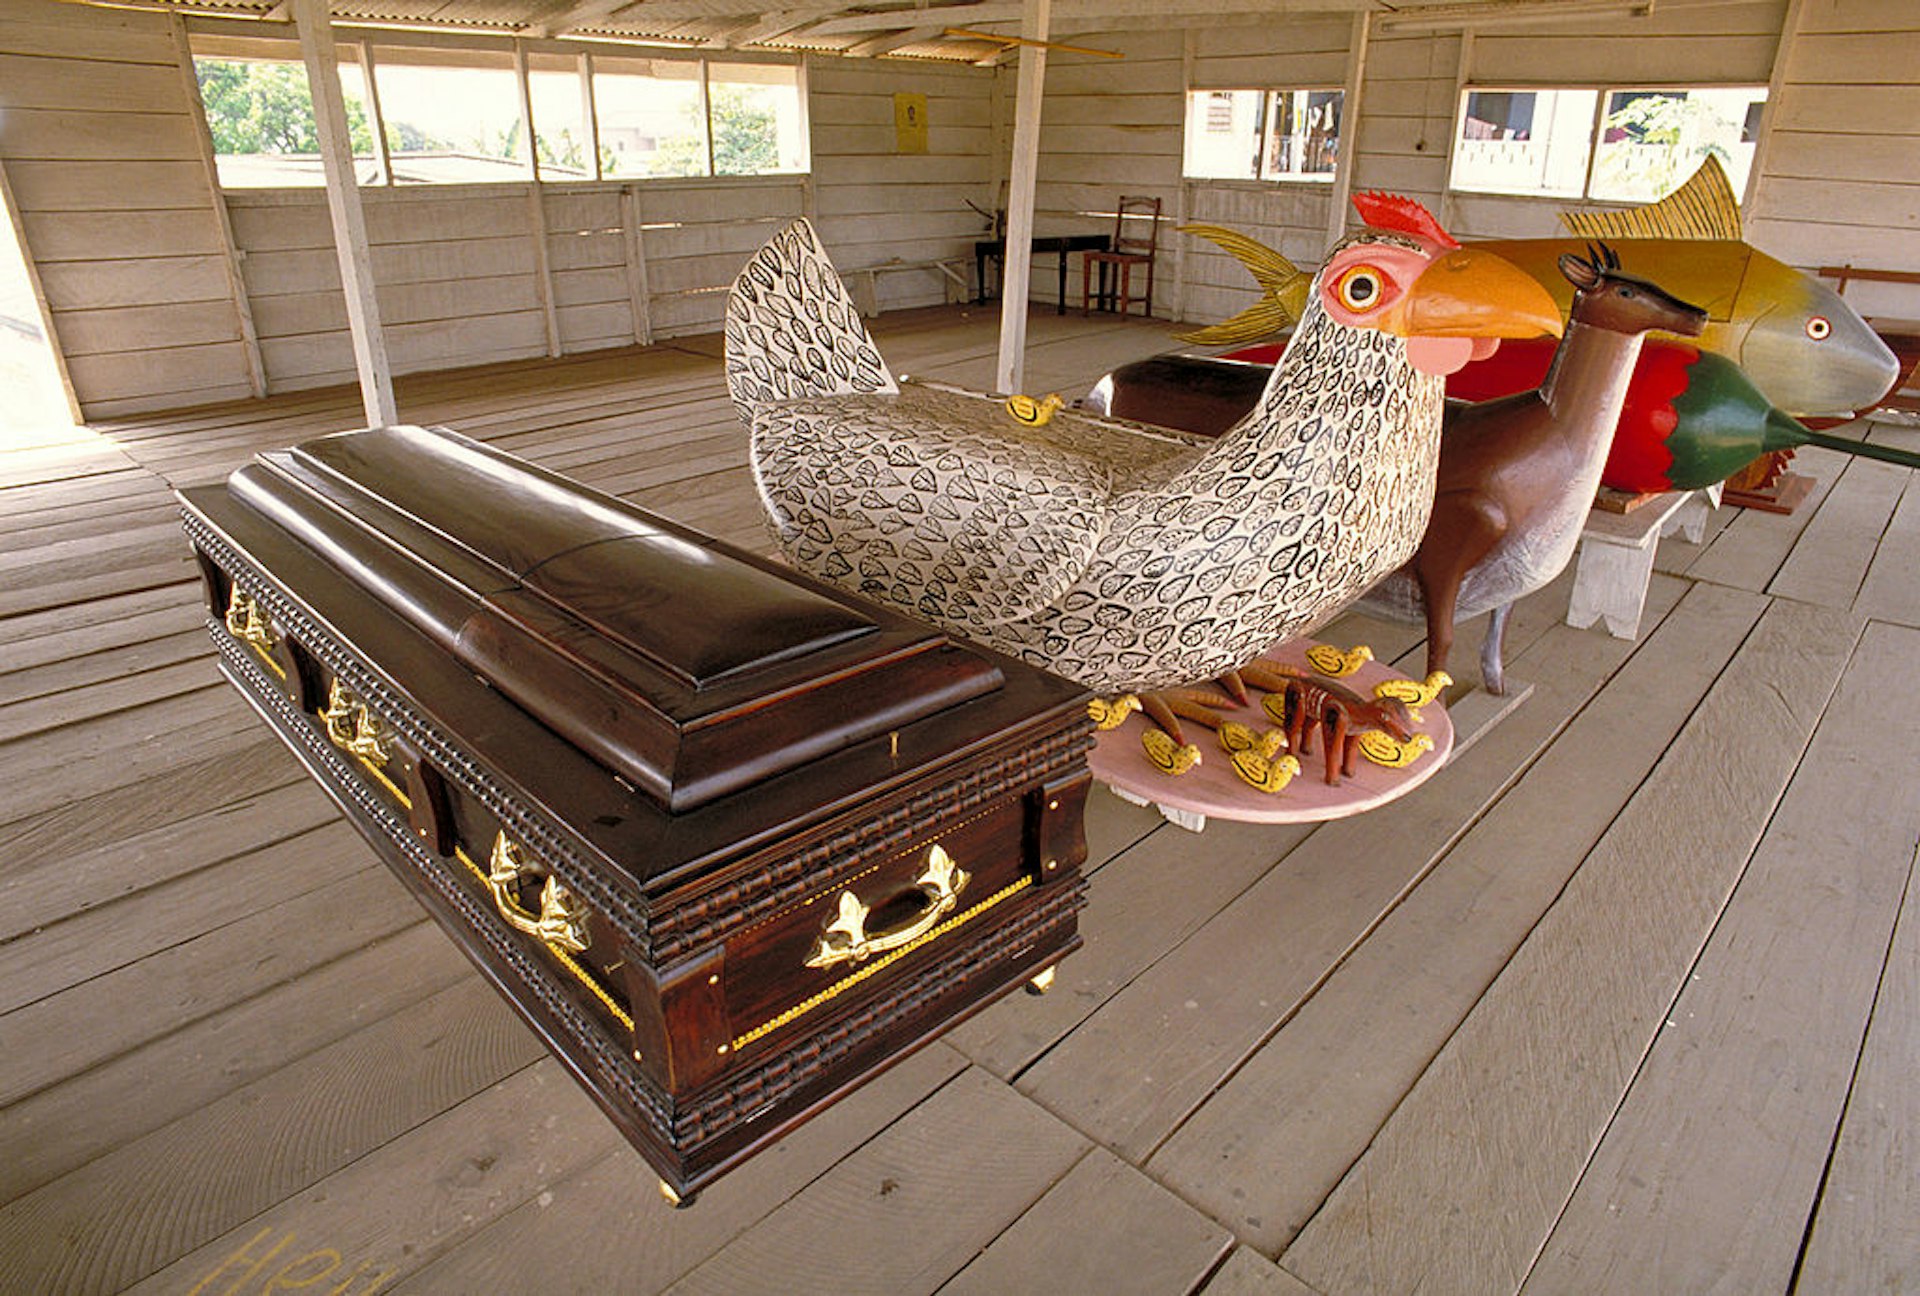 Whimsical "fantasy coffins" made in the form of animals and material objects in the studio of an artisan in Teshie-Nungua, Ghana, West Africa